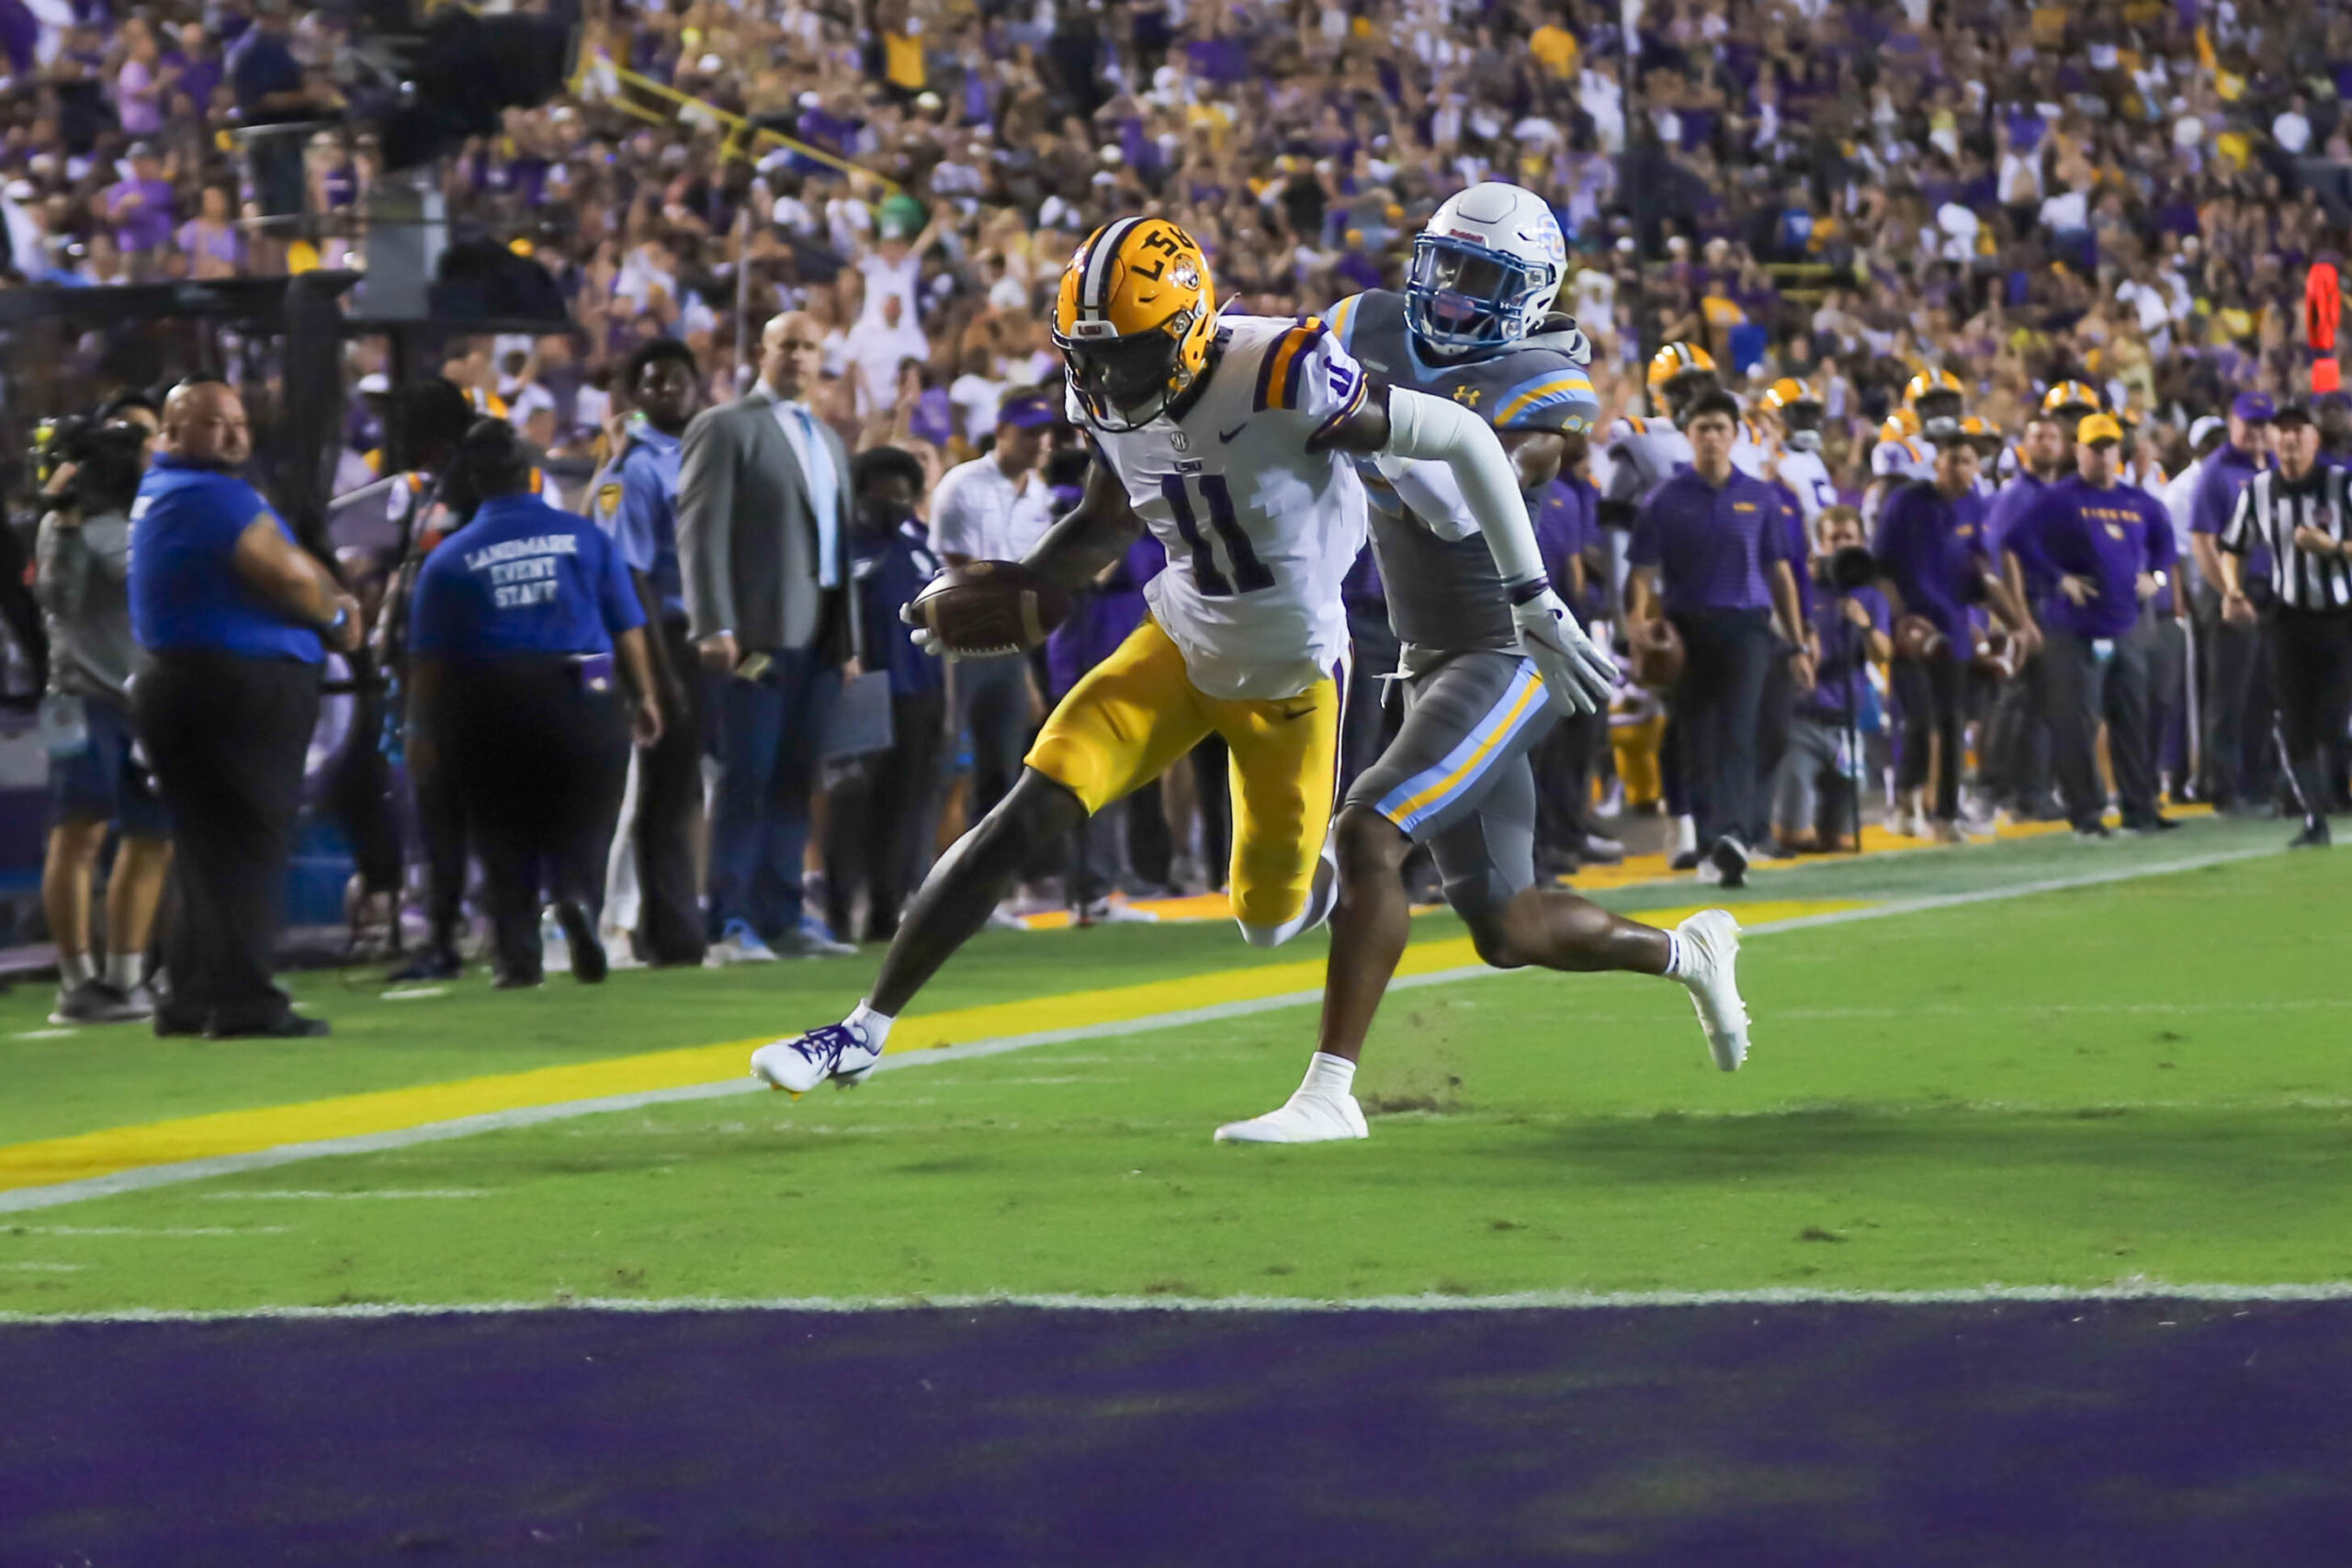 The LSU Tigers Use Record Breaking First Quarter Performance To Run Past The Southern Jaguars 65-17